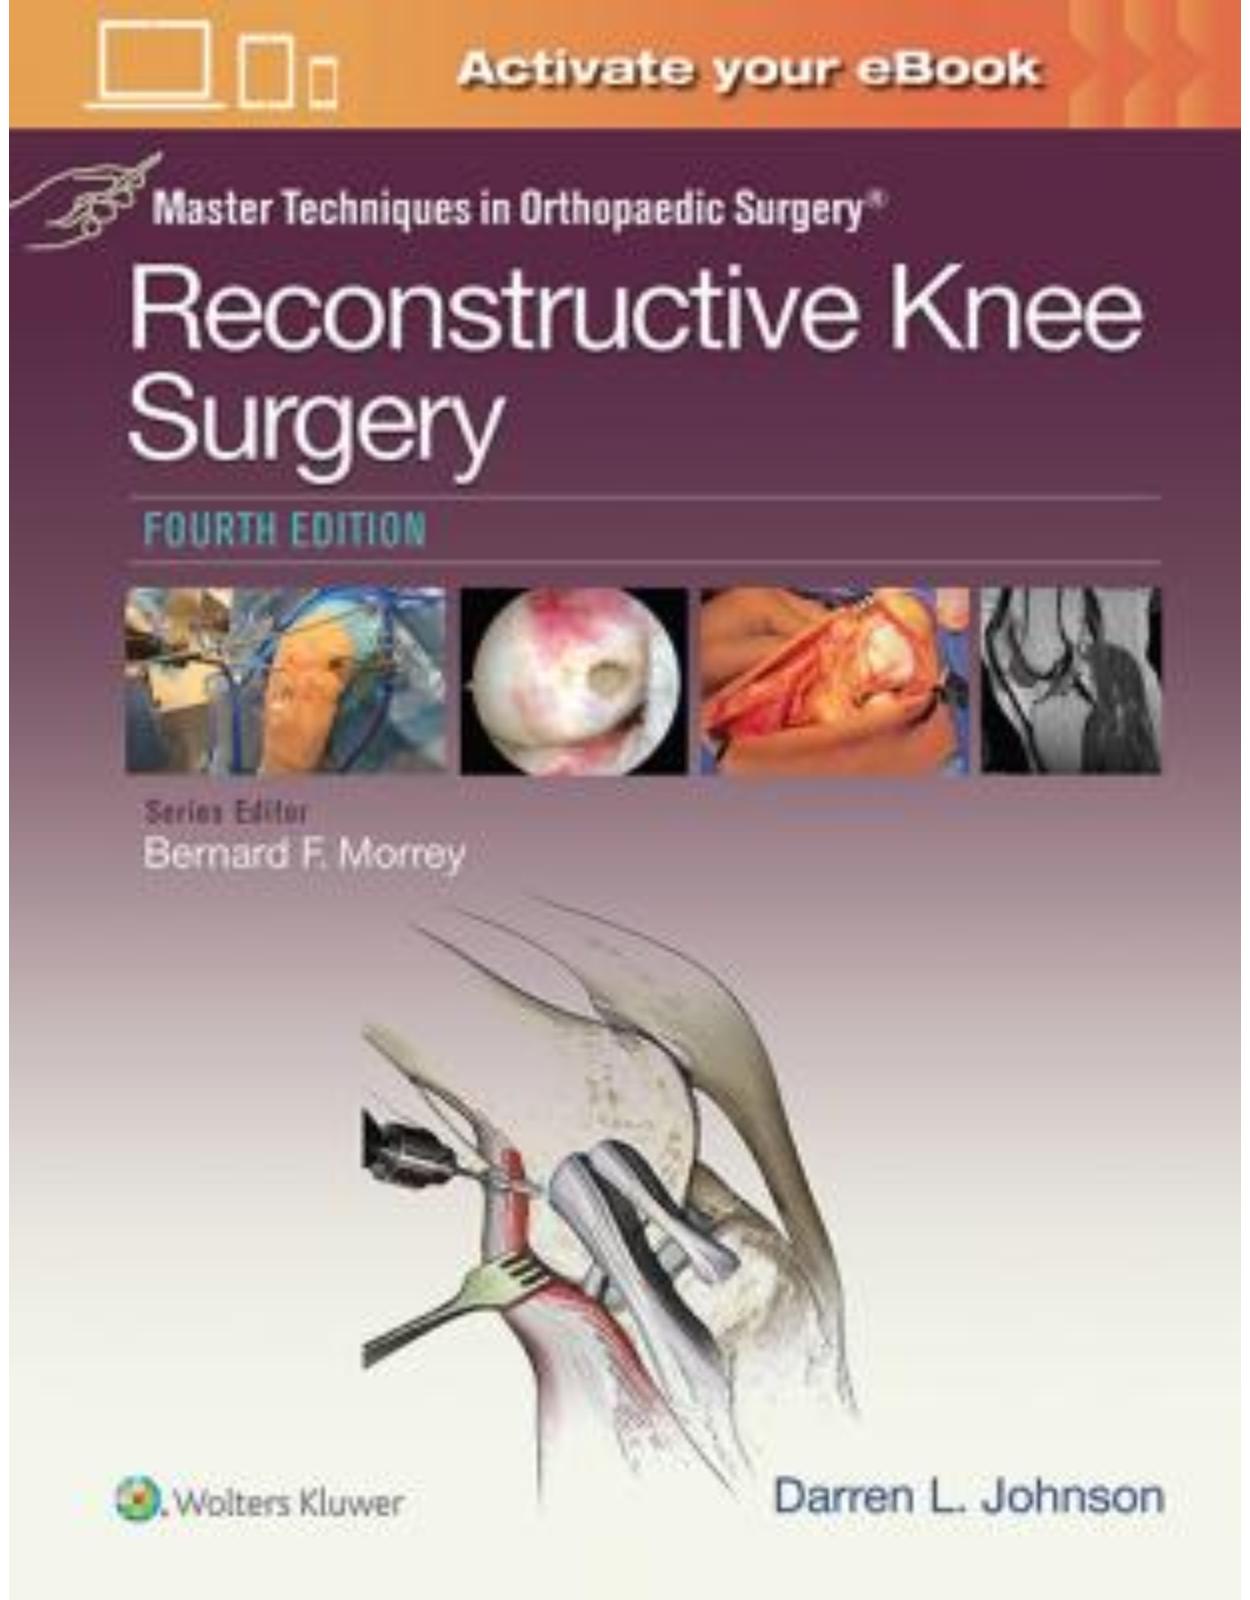 Master Techniques in Orthopaedic Surgery: Reconstructive Knee Surgery, 4e 